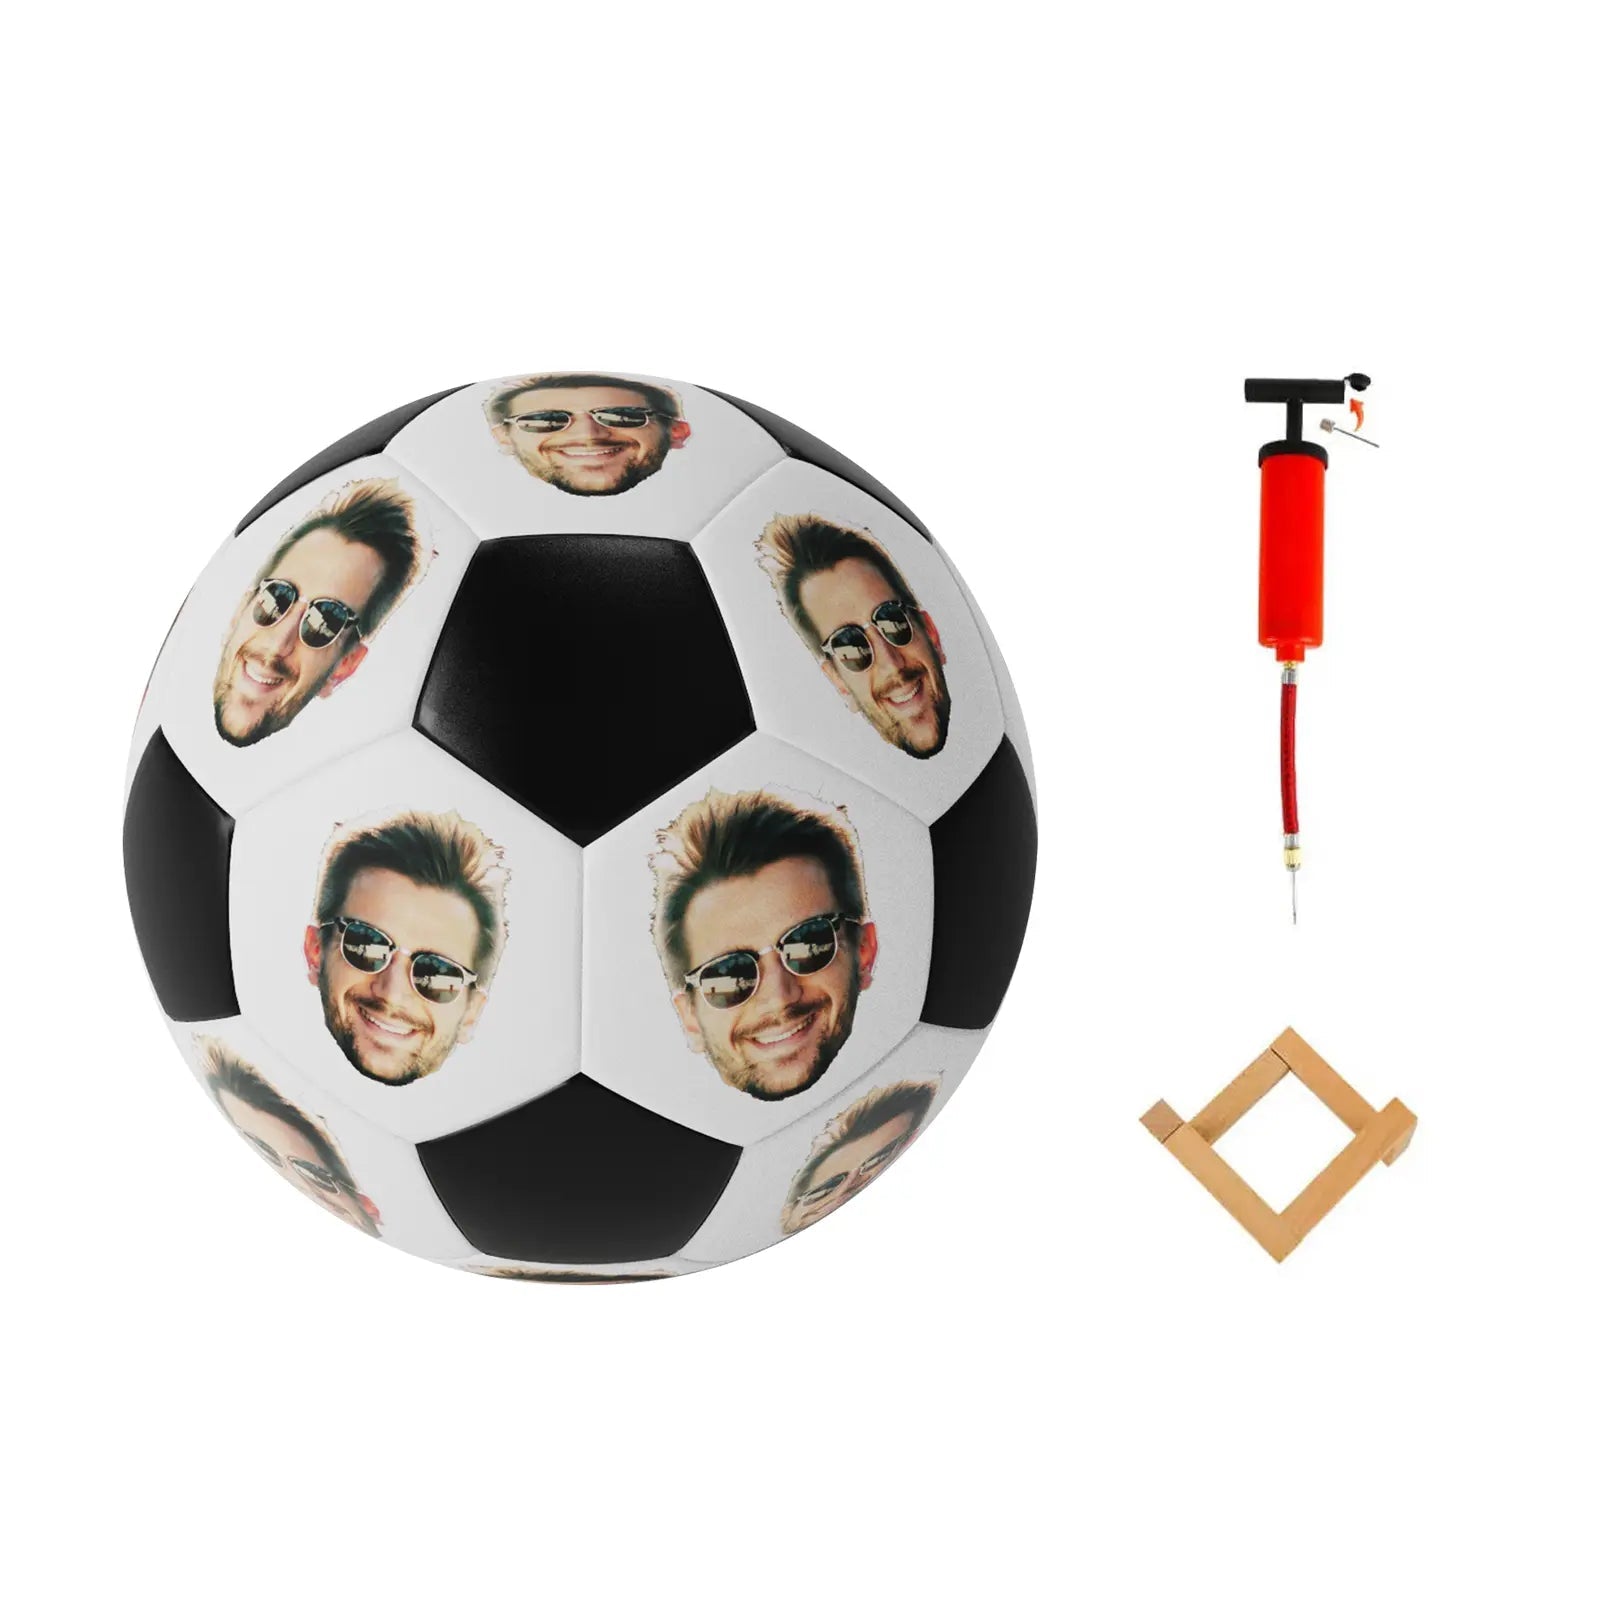 Personalized Custom Photo Gift Soccer Ball - Family Watchs